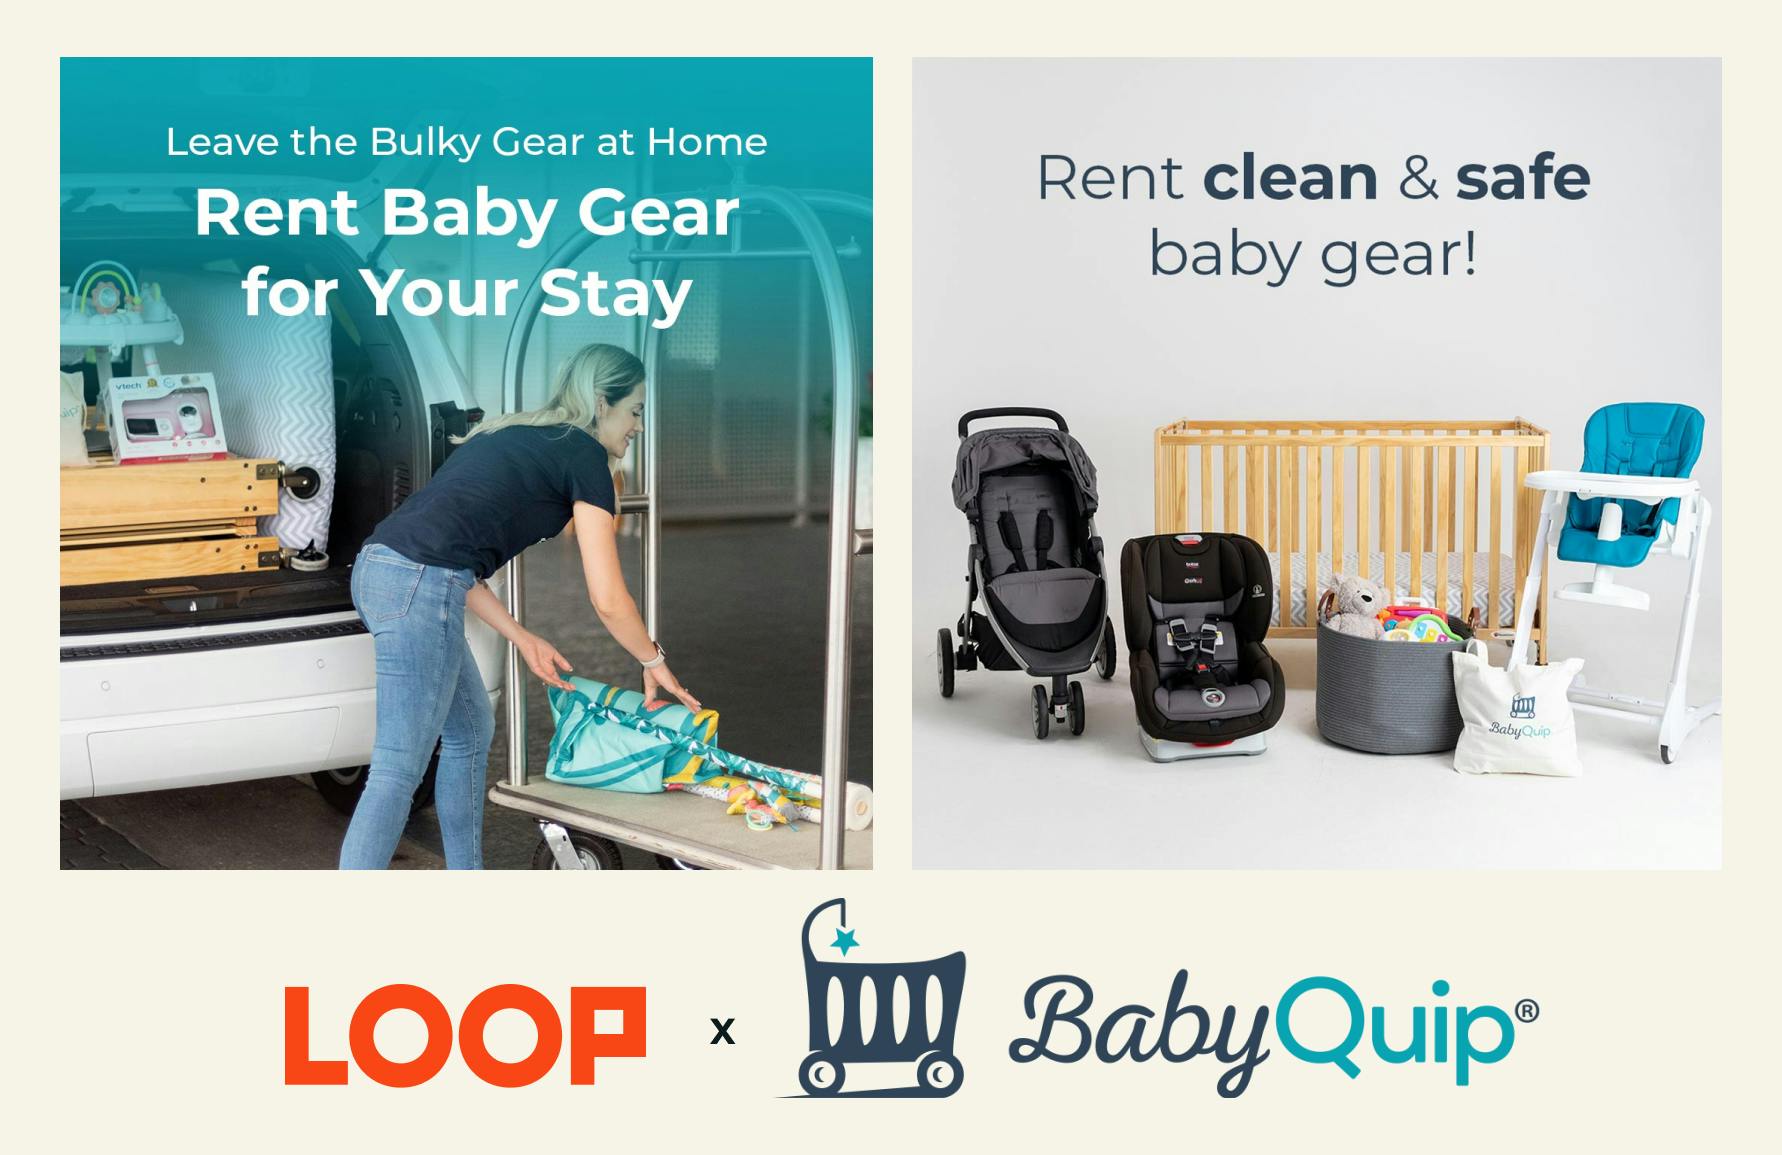 Save Room for Fun With Your Little One - Save 10% on BabyQuip with Loop Membership!